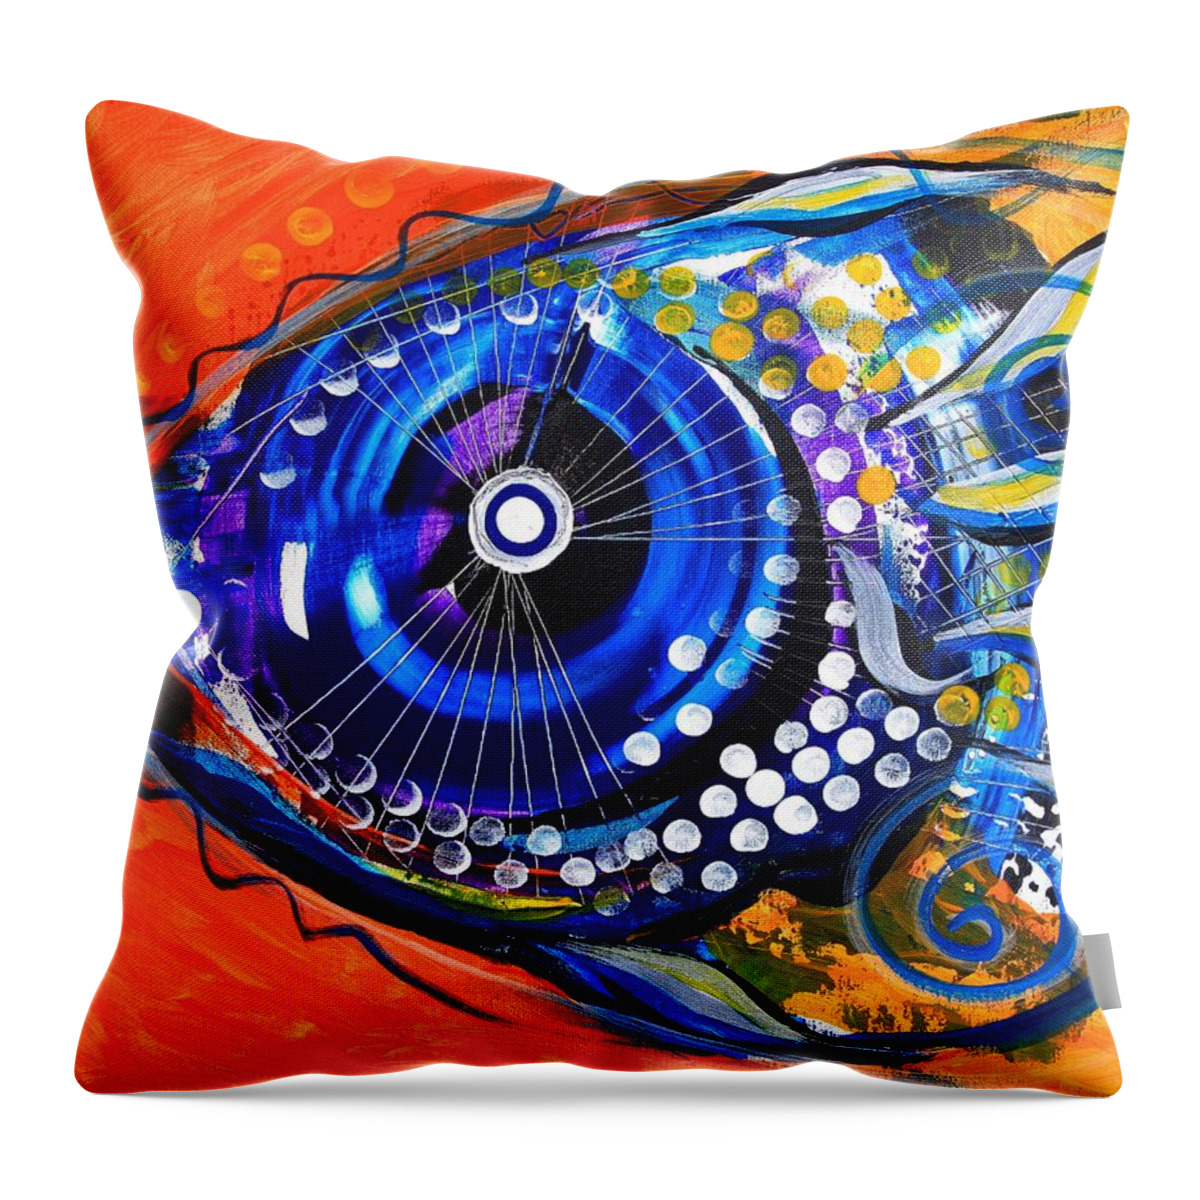 Fish Throw Pillow featuring the painting Tenured Acrimonious Fish by J Vincent Scarpace